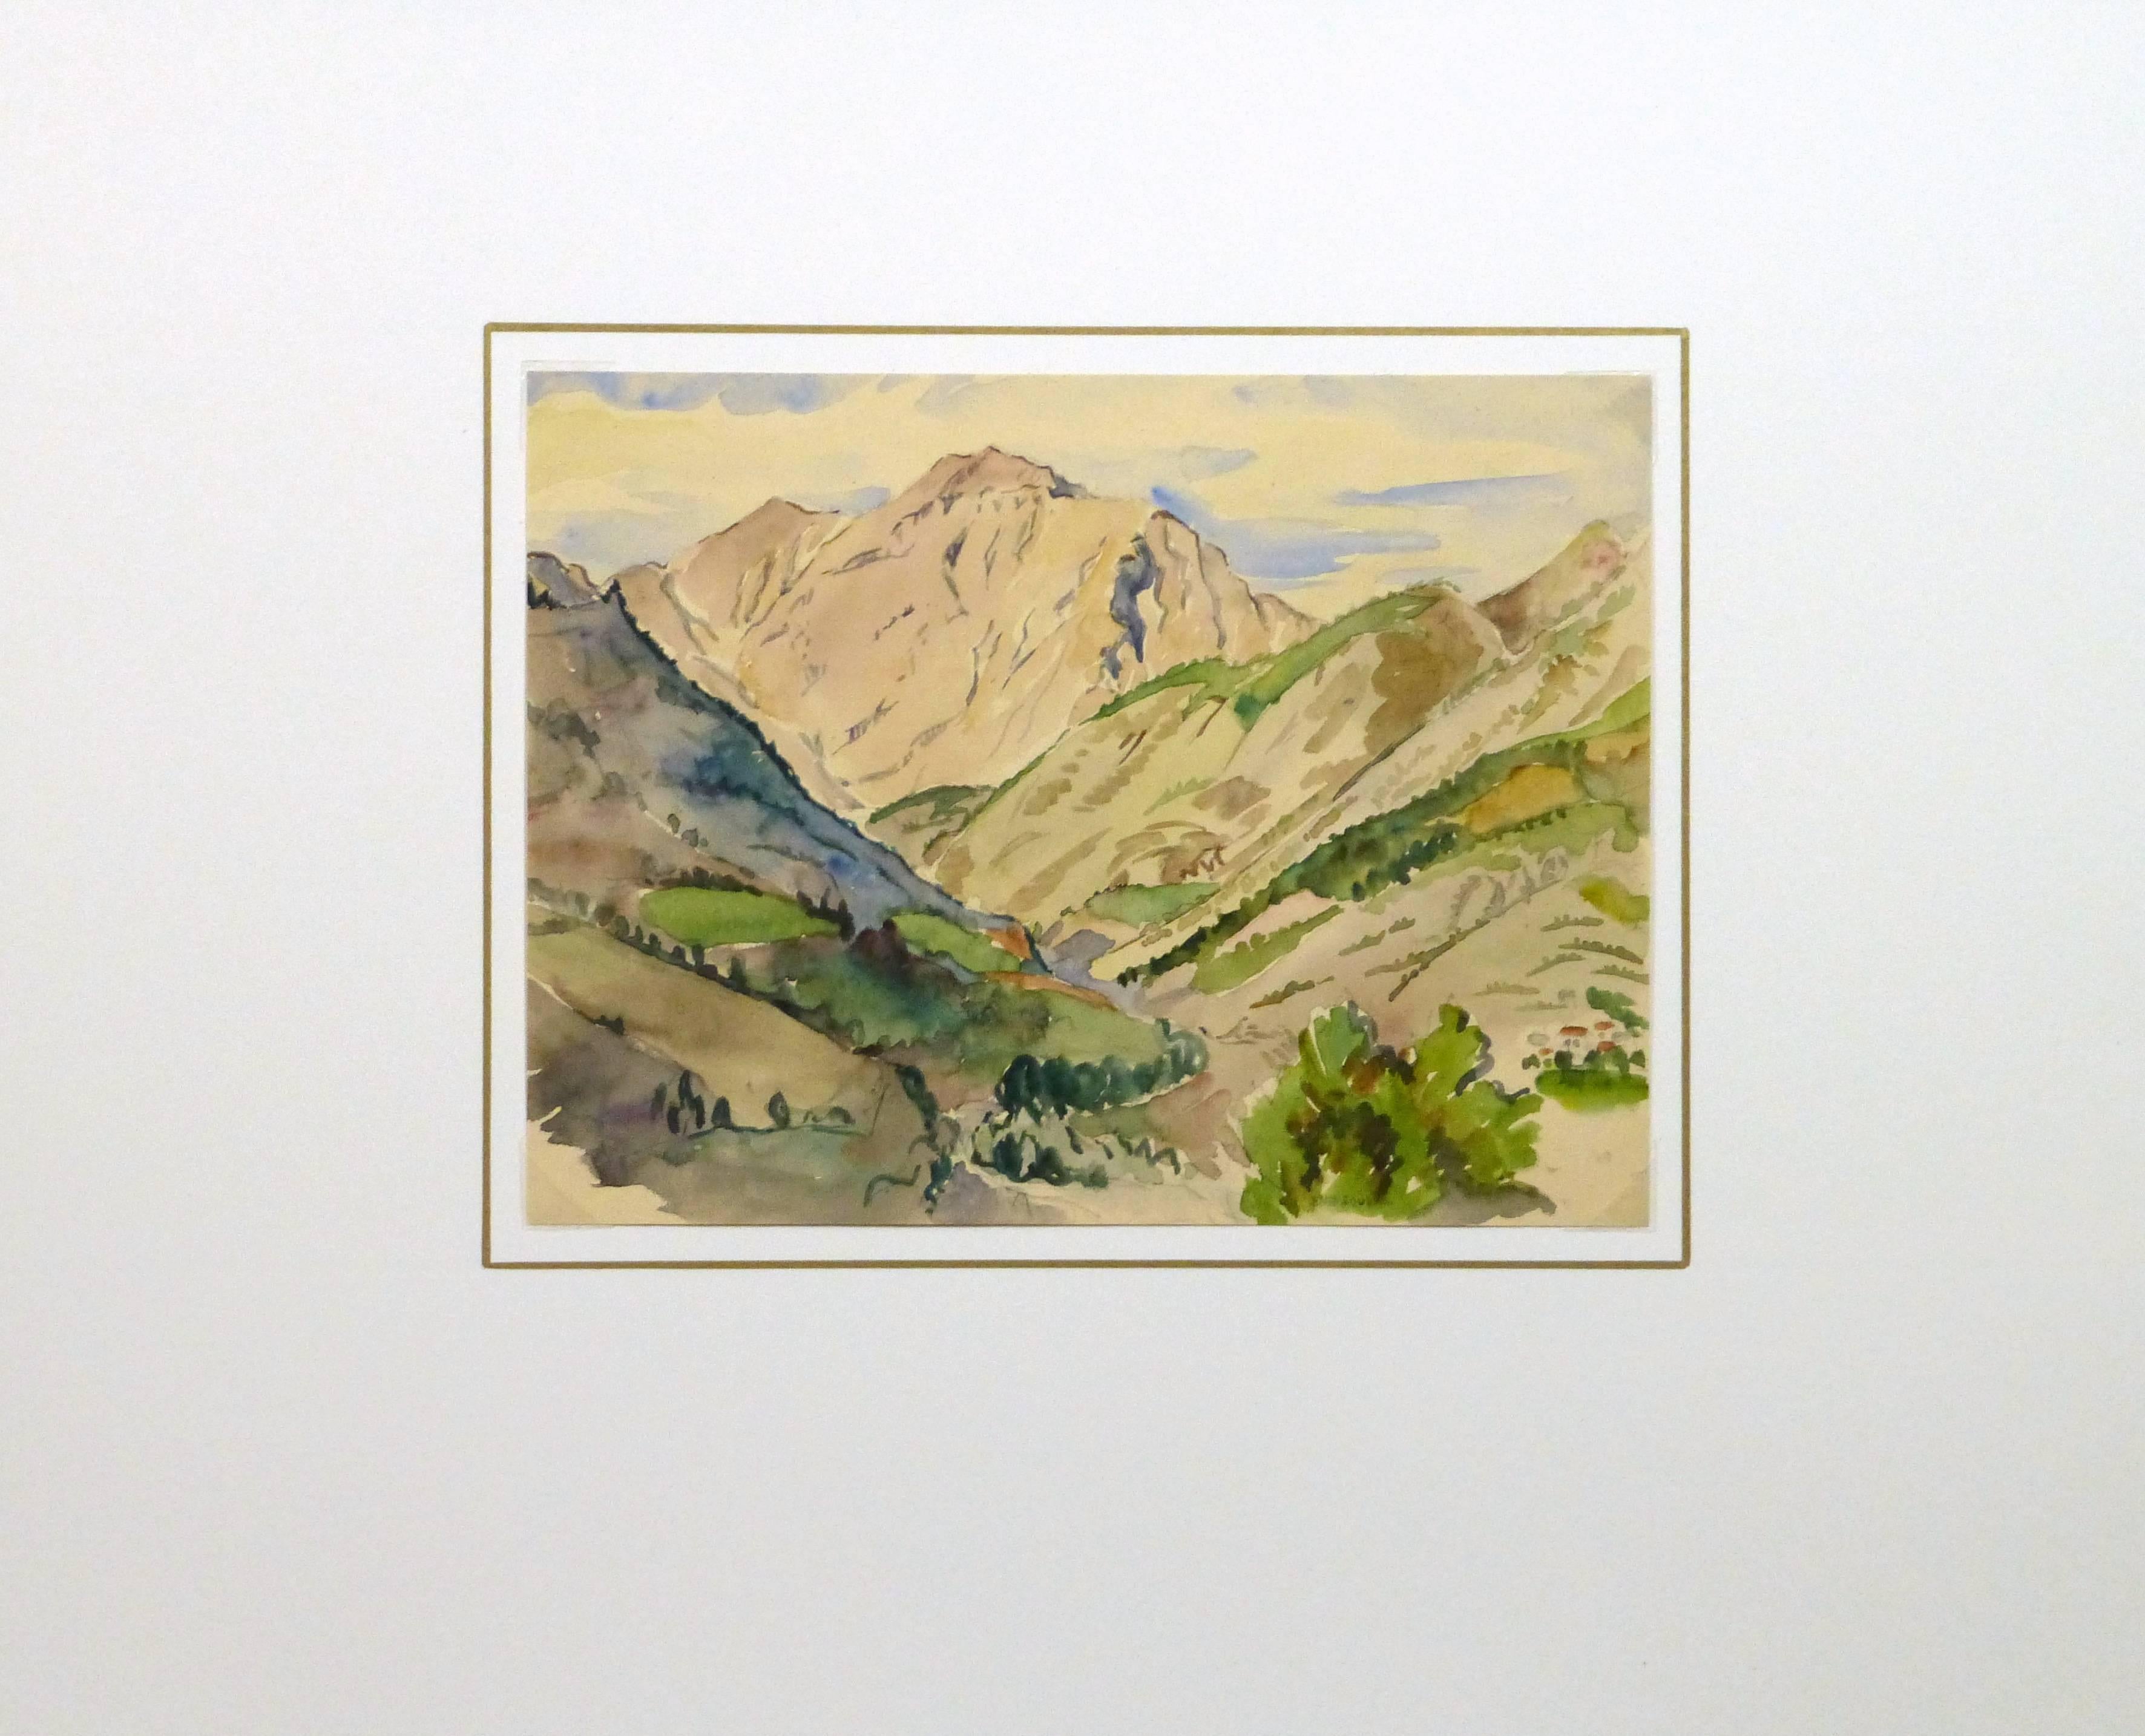 Peaceful watercolor of a winding mountain valley in soft hues, circa 1930. Signed lower right center. 

Original artwork on paper displayed on a white mat with a gold border. Archival plastic sleeve and Certificate of Authenticity included. Artwork,